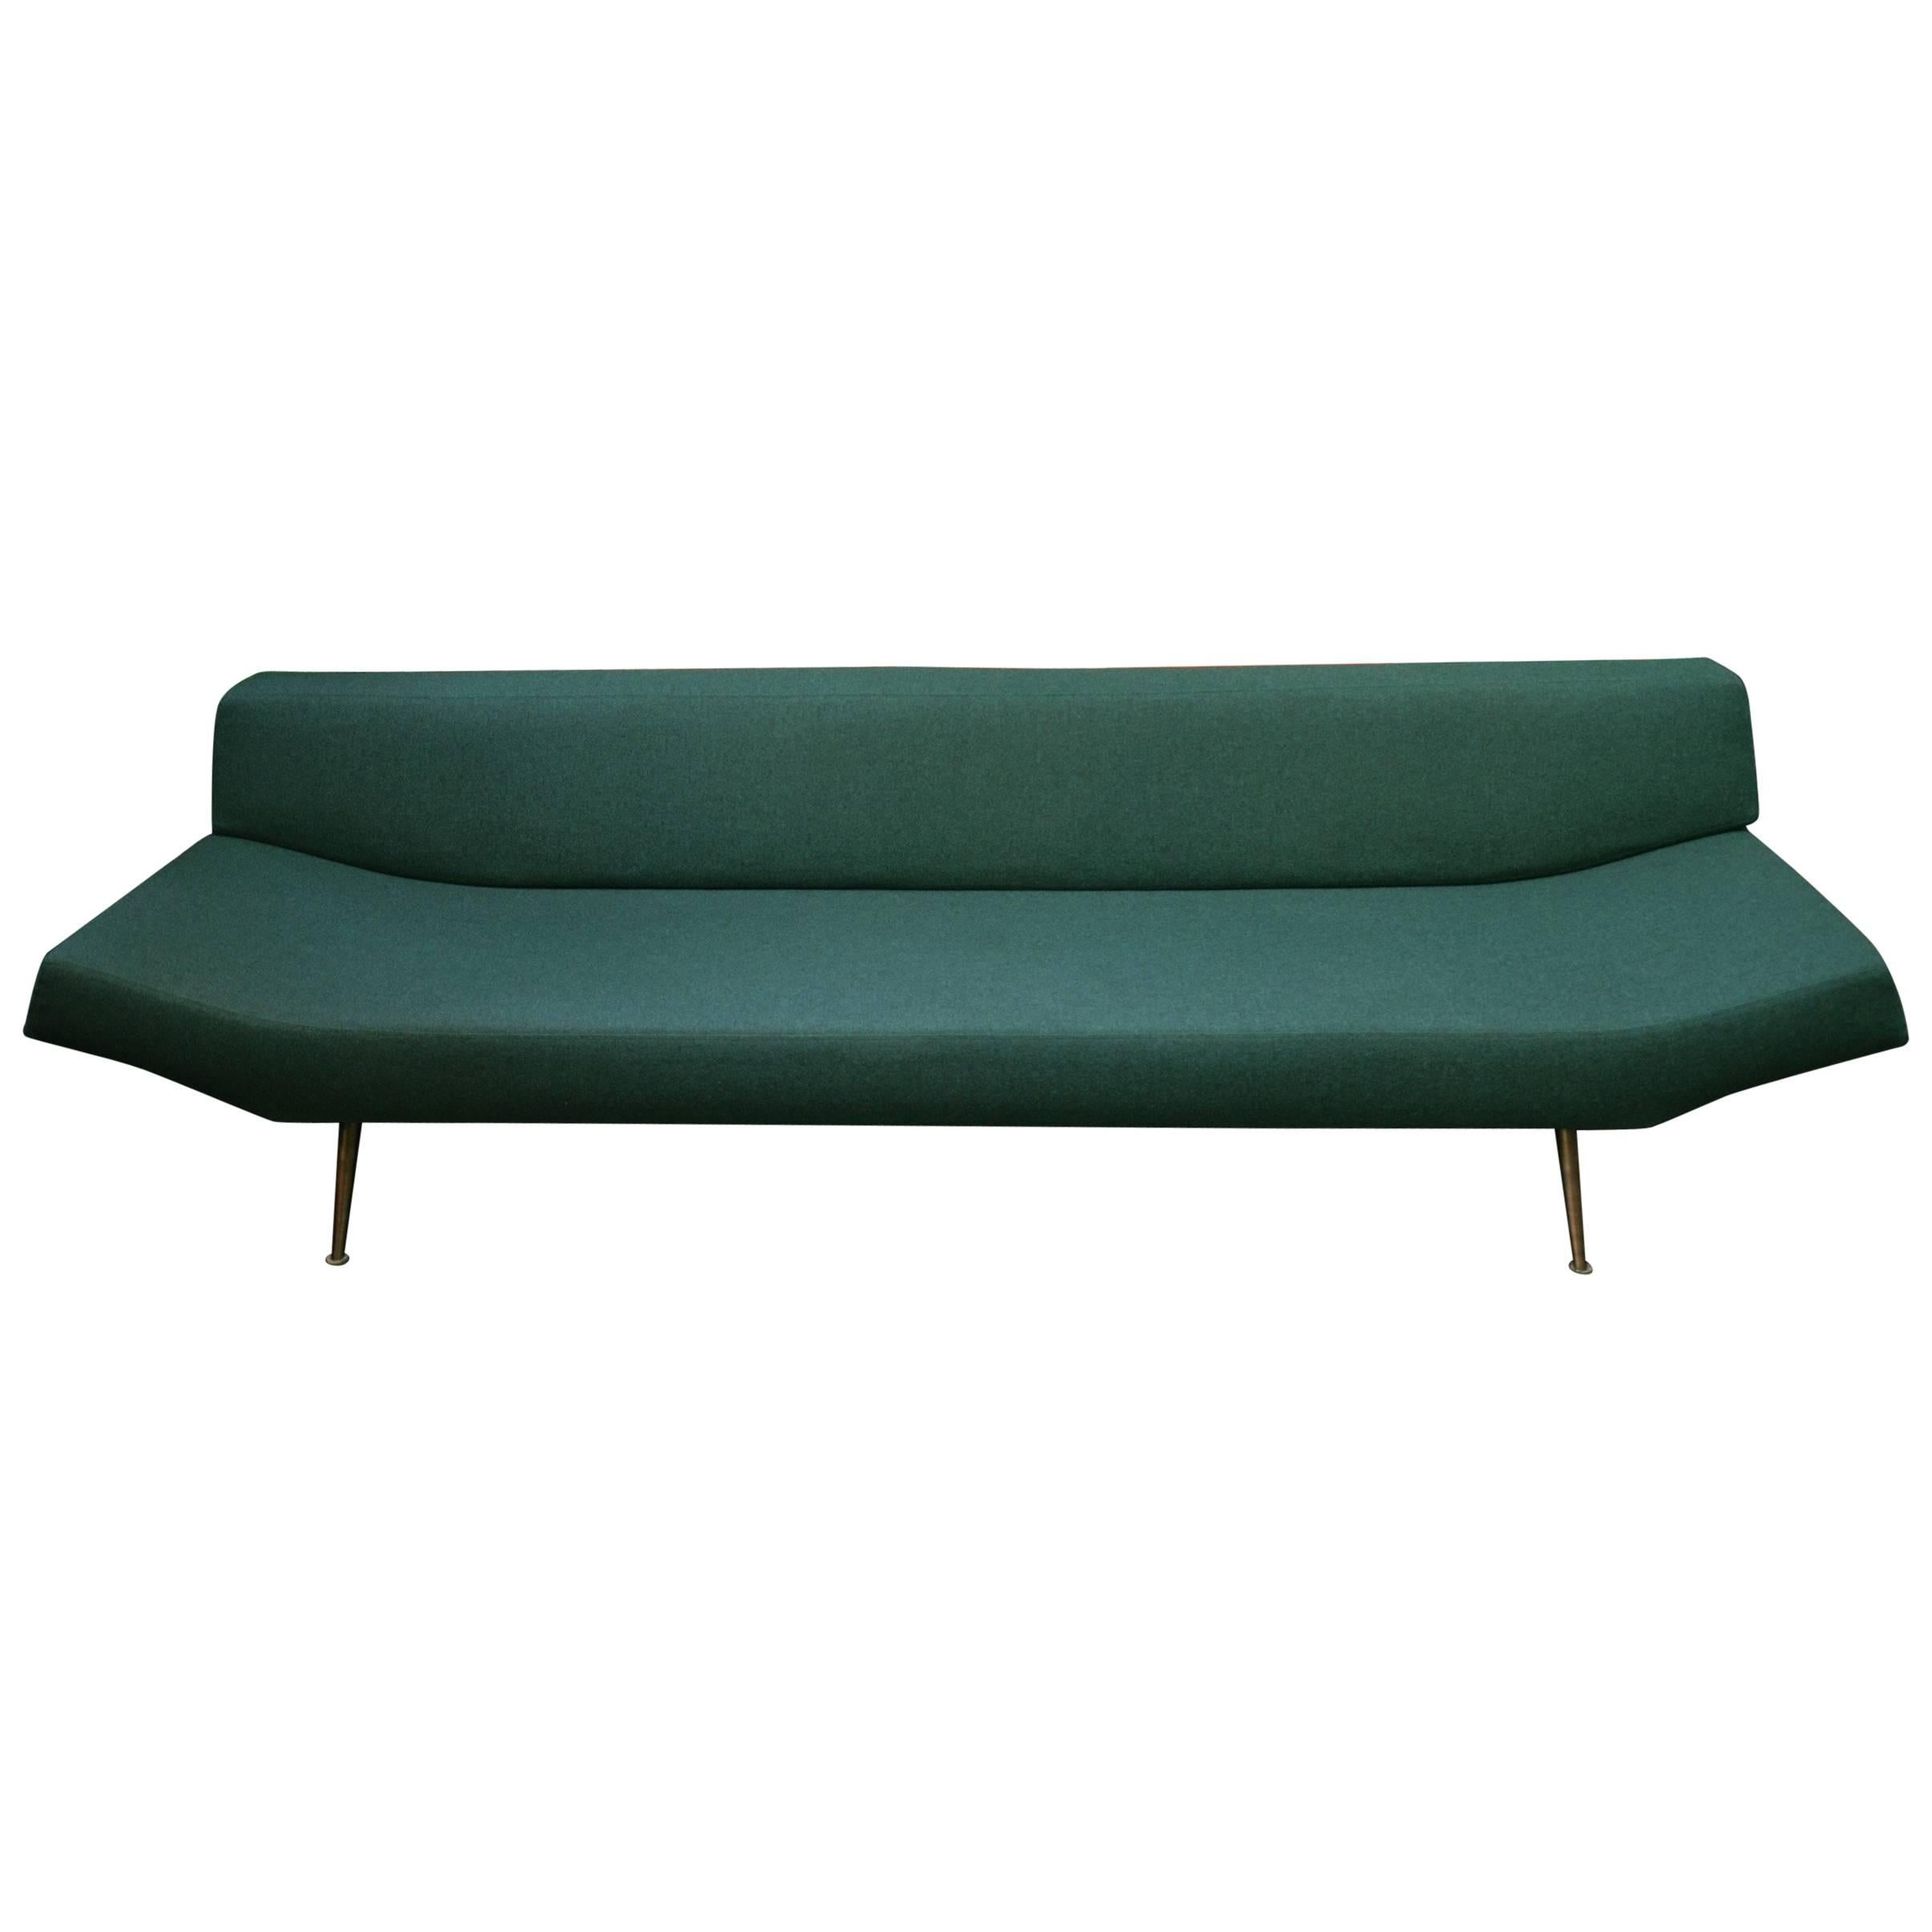 Very Rare Sculptural Sofa Attributed to Adrian Pearsall, USA, 1956 For Sale